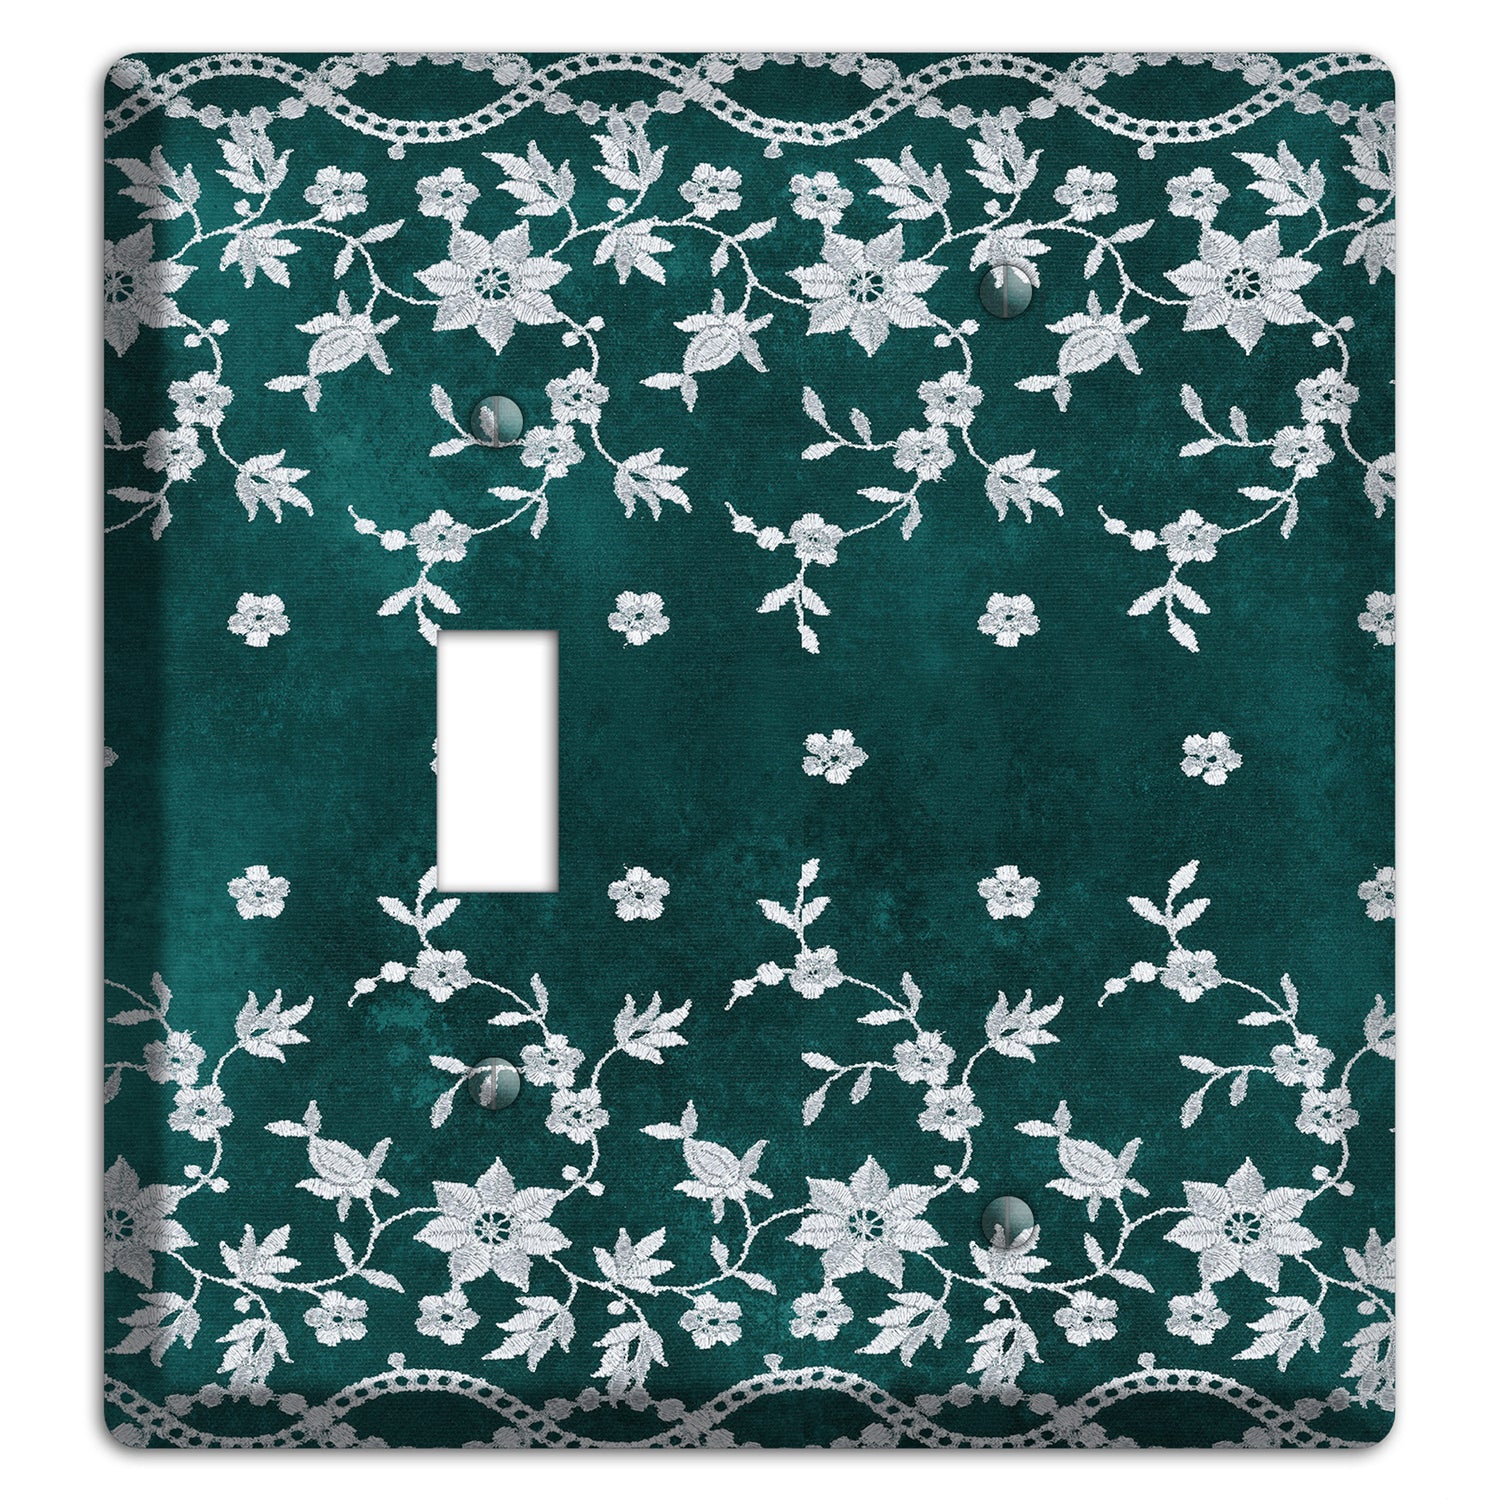 Embroidered Floral Teal Toggle / Blank Wallplate